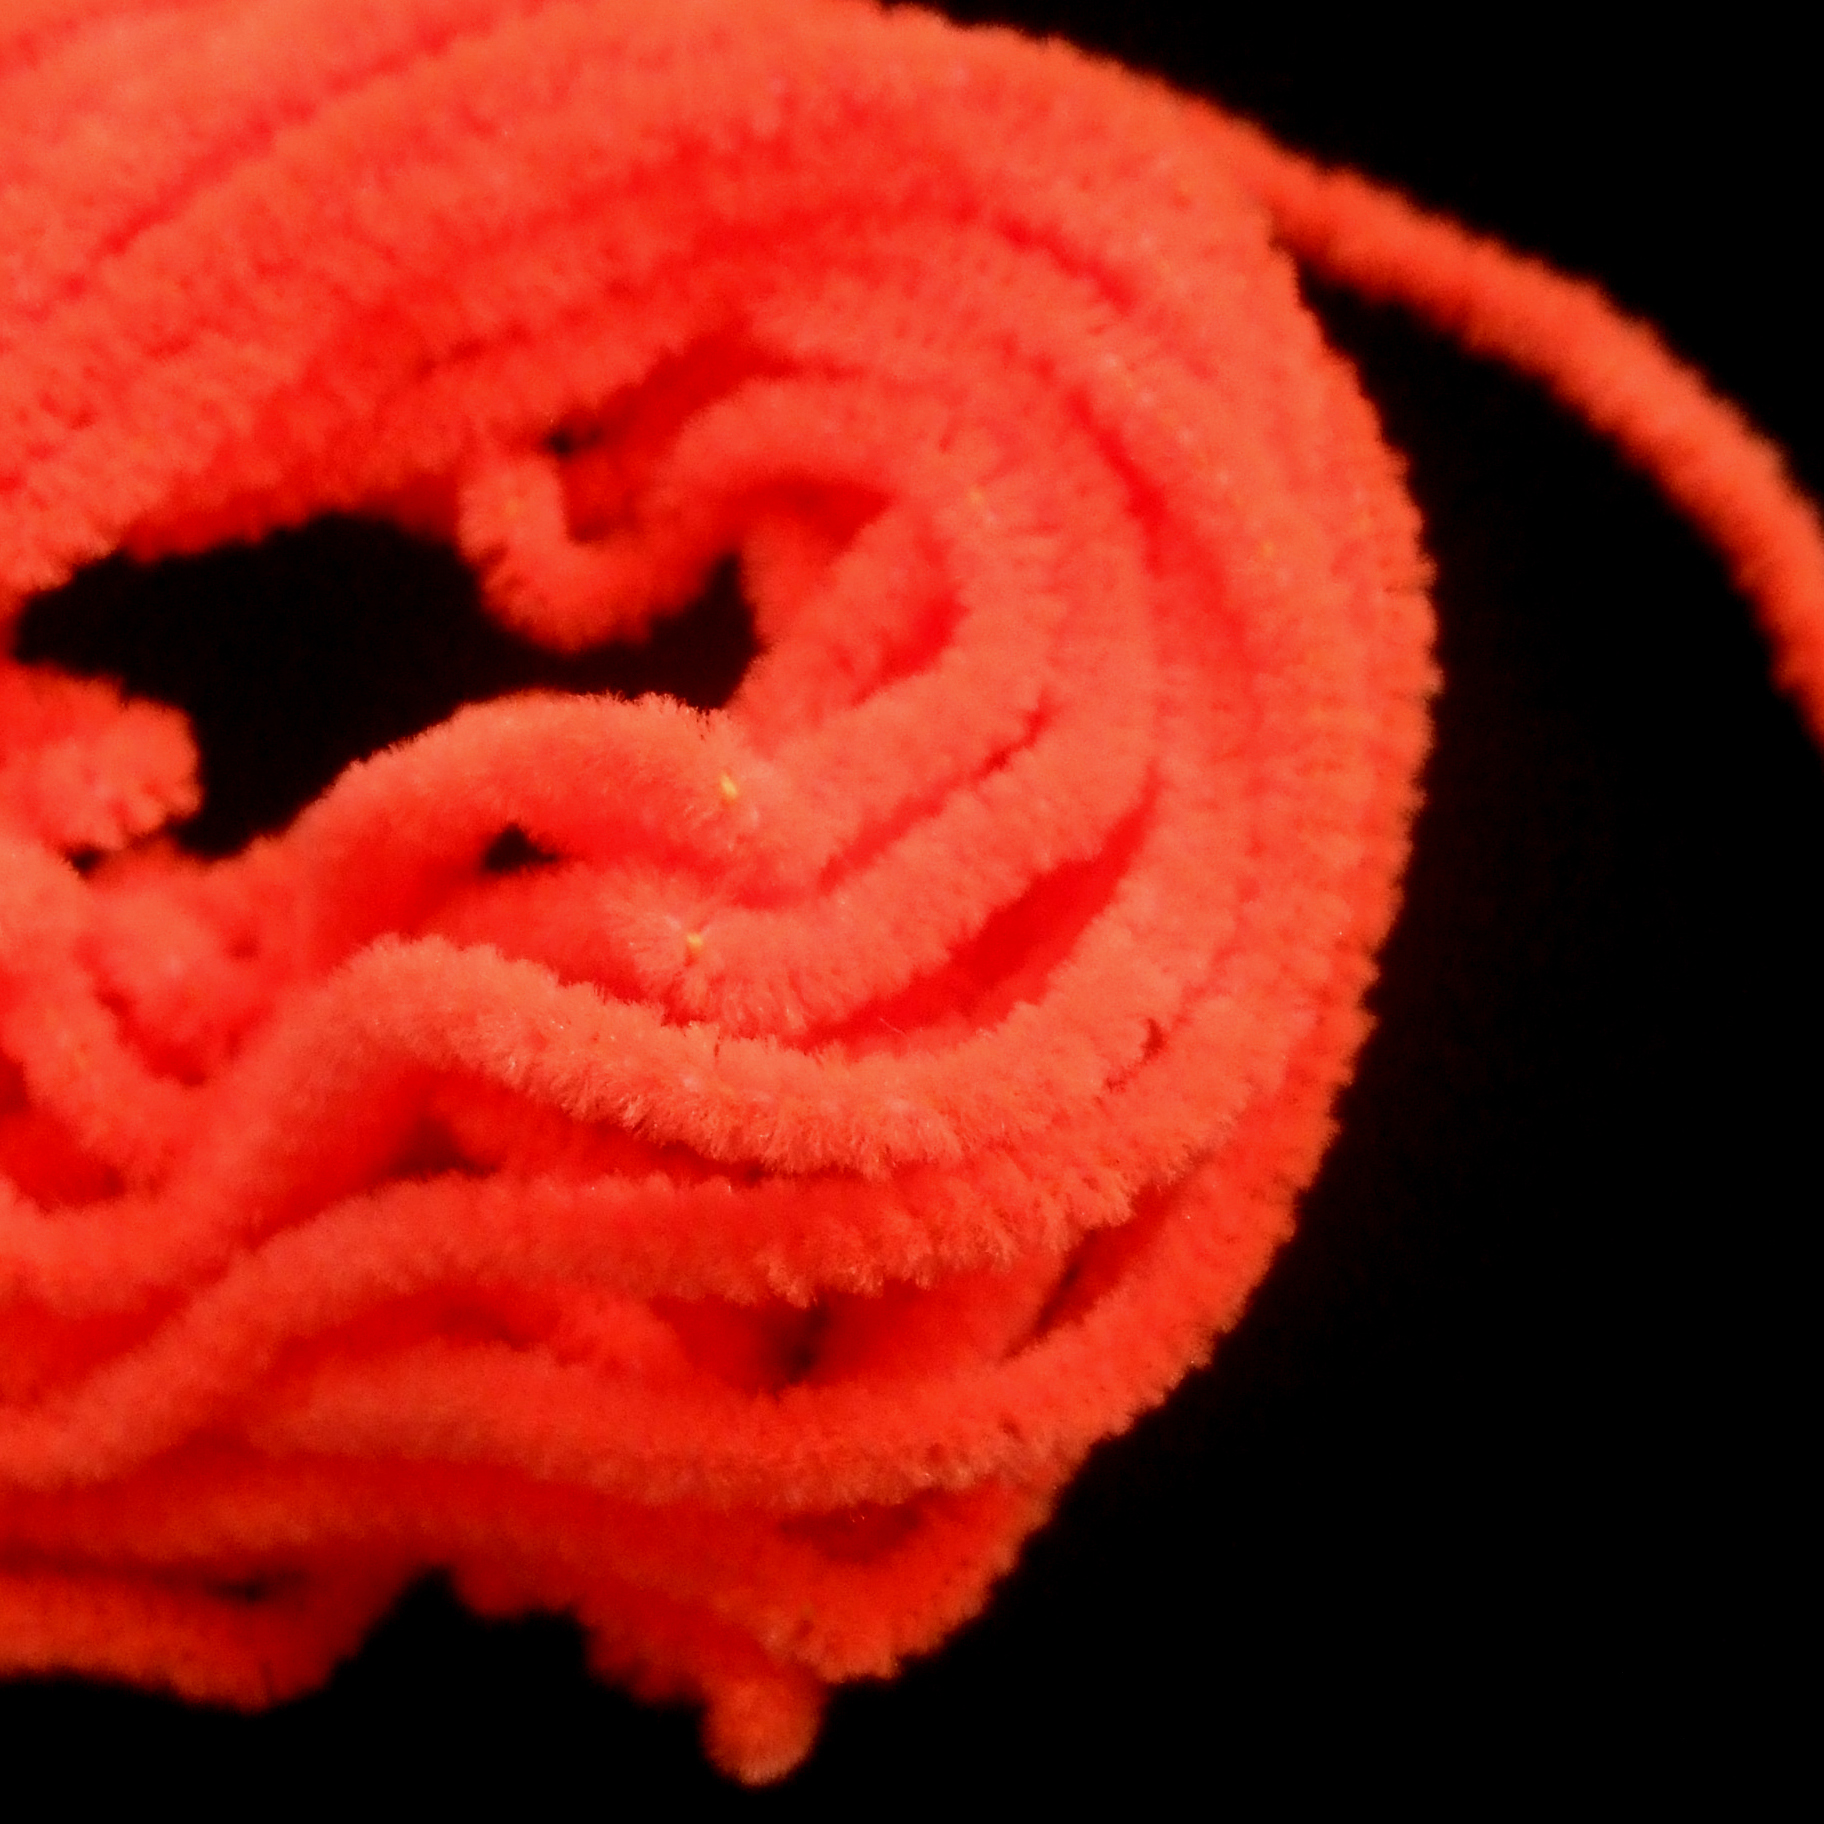 Fluorescent Chenille, Fly Tying